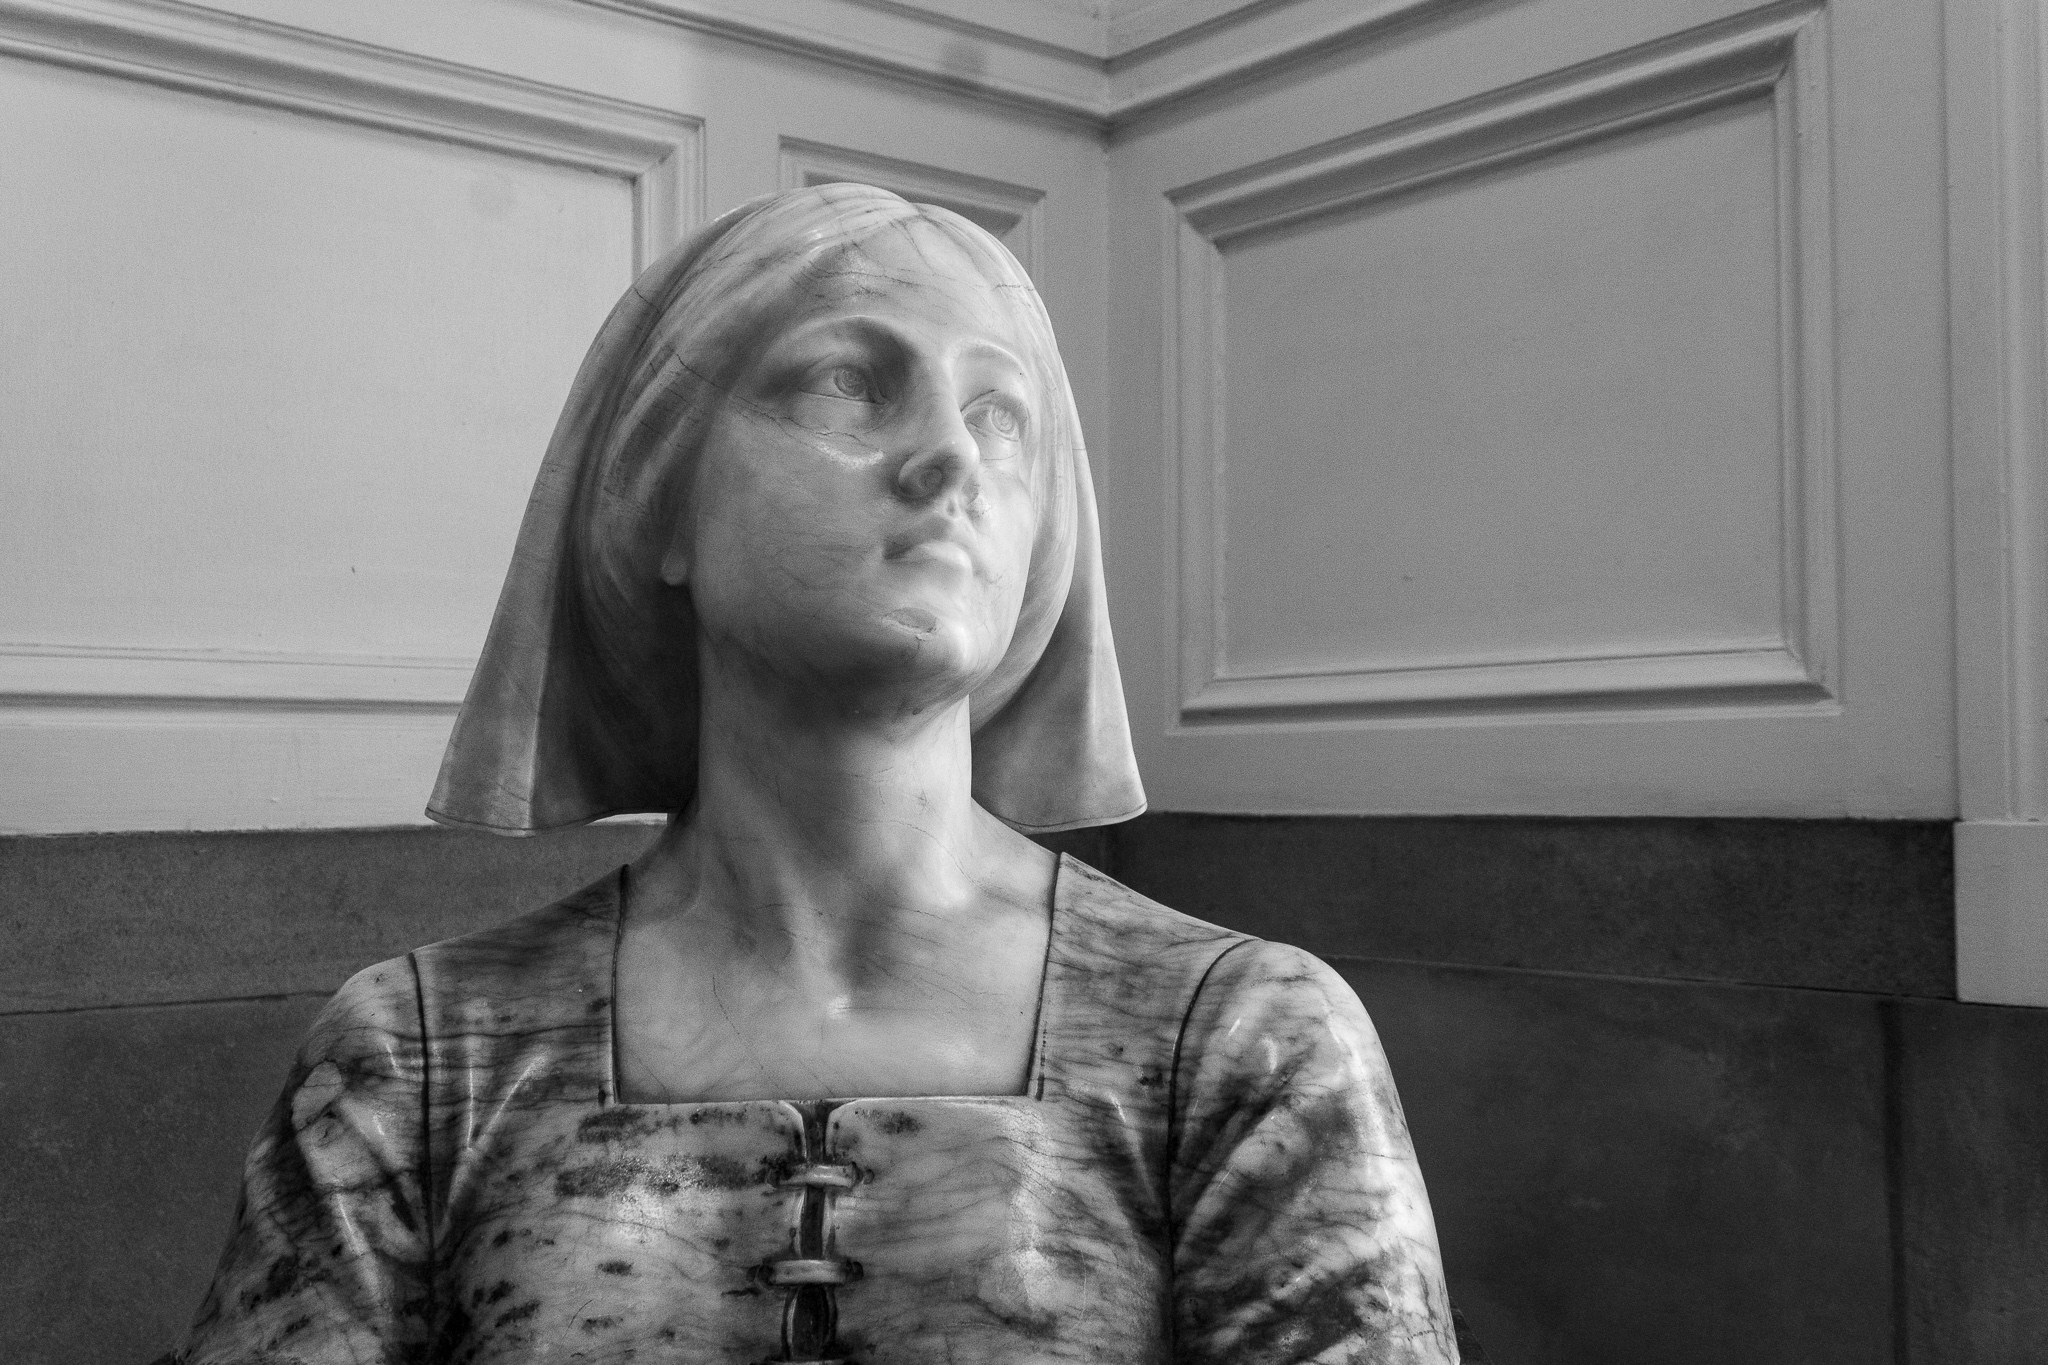 Marble bust of Florence Nightingale as a young woman in a nurse's uniform